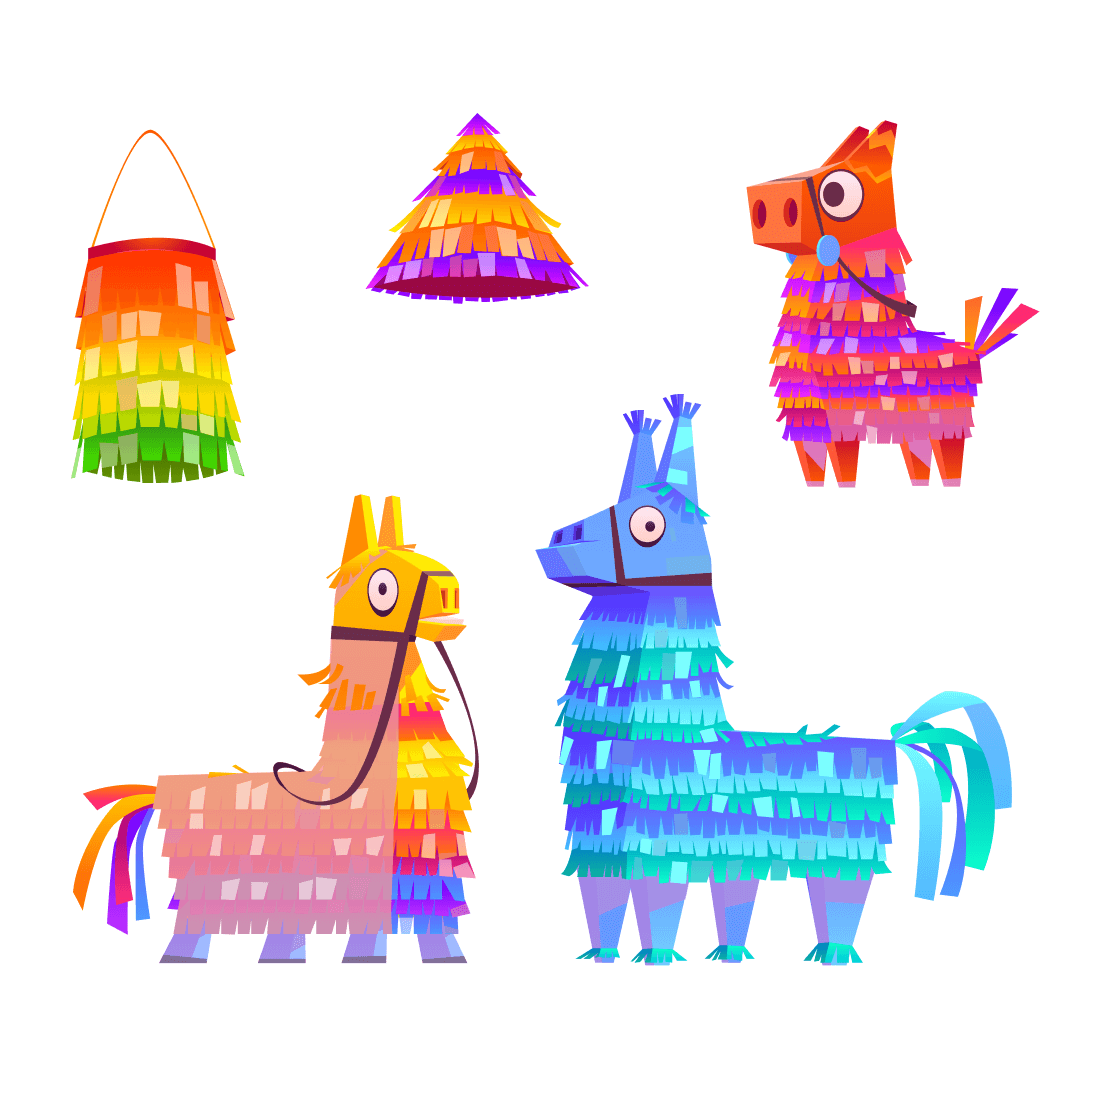 Group of colorful llamas made out of paper.